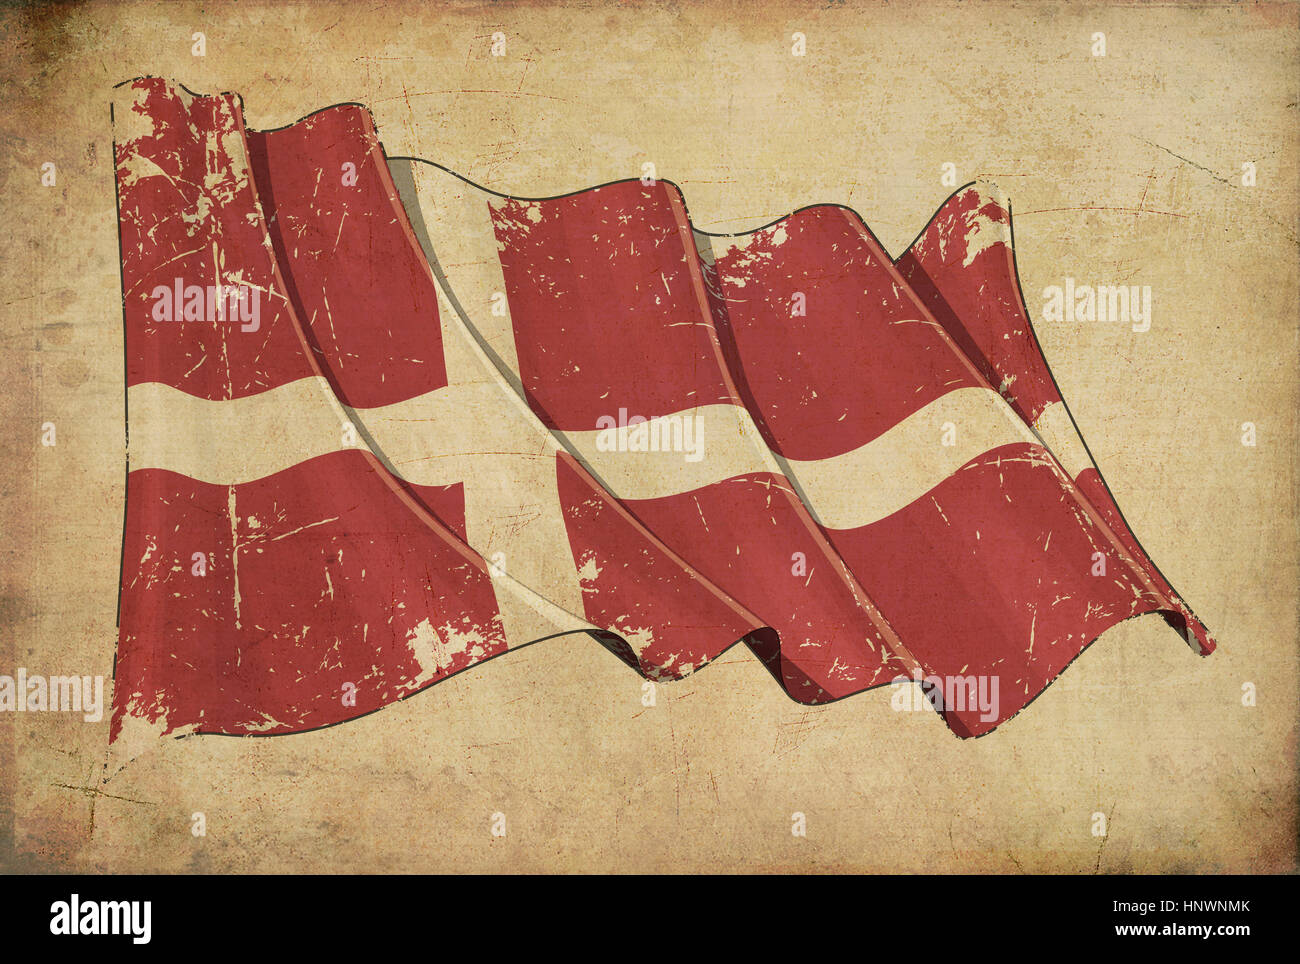 Wallpaper depicting an aged paper, textured background with a scratched illustration of the flag of Denmark Stock Photo